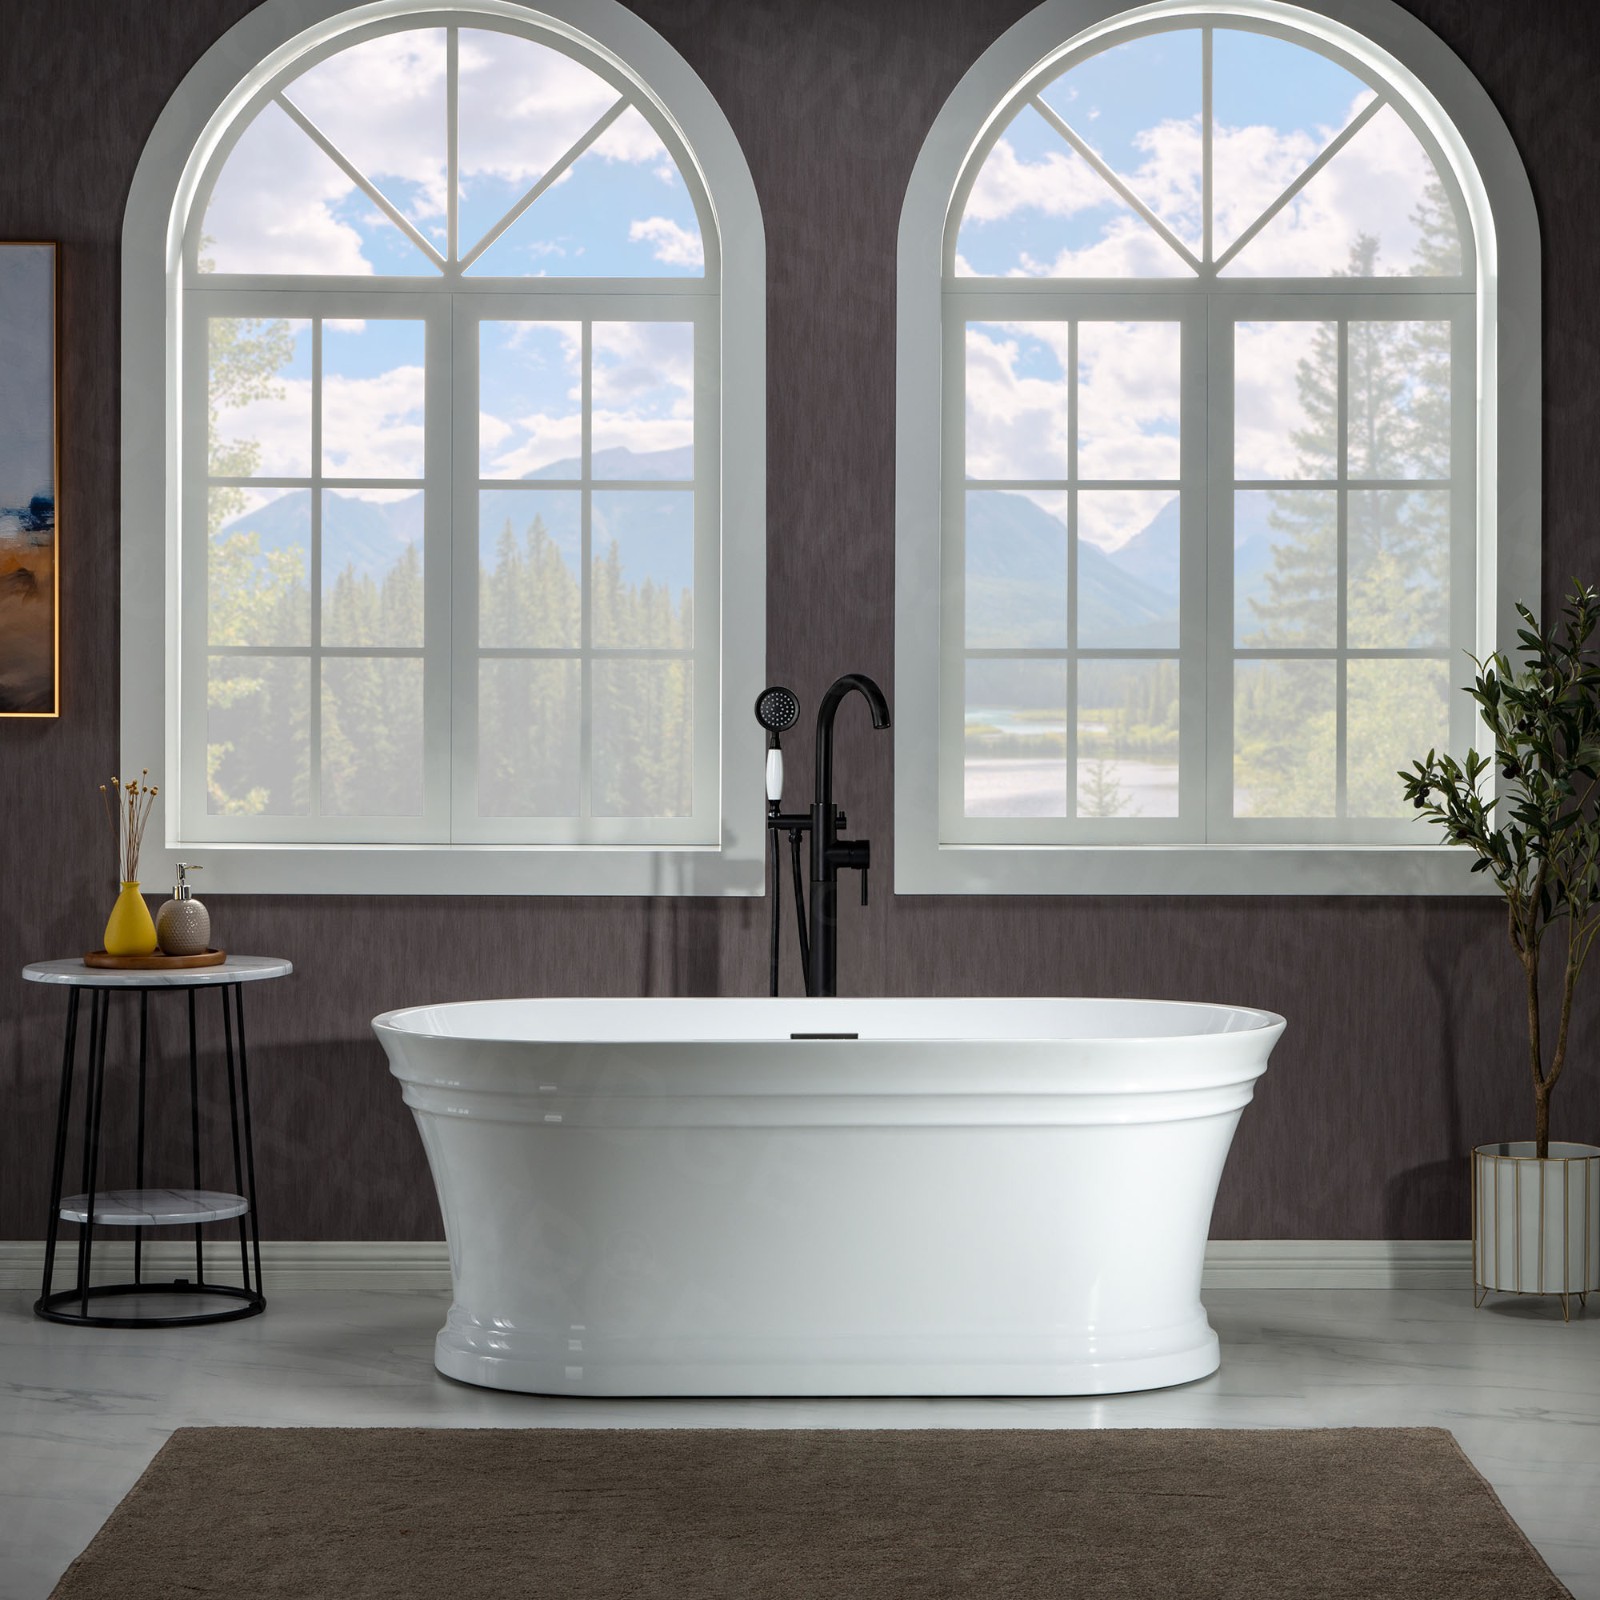  WOODBRIDGE 67 in. Freestanding Double Ended Acrylic Soaking Bathtub with Center Drain Assembly and Overflow, BTA1537/B1537, Glossy White_7714